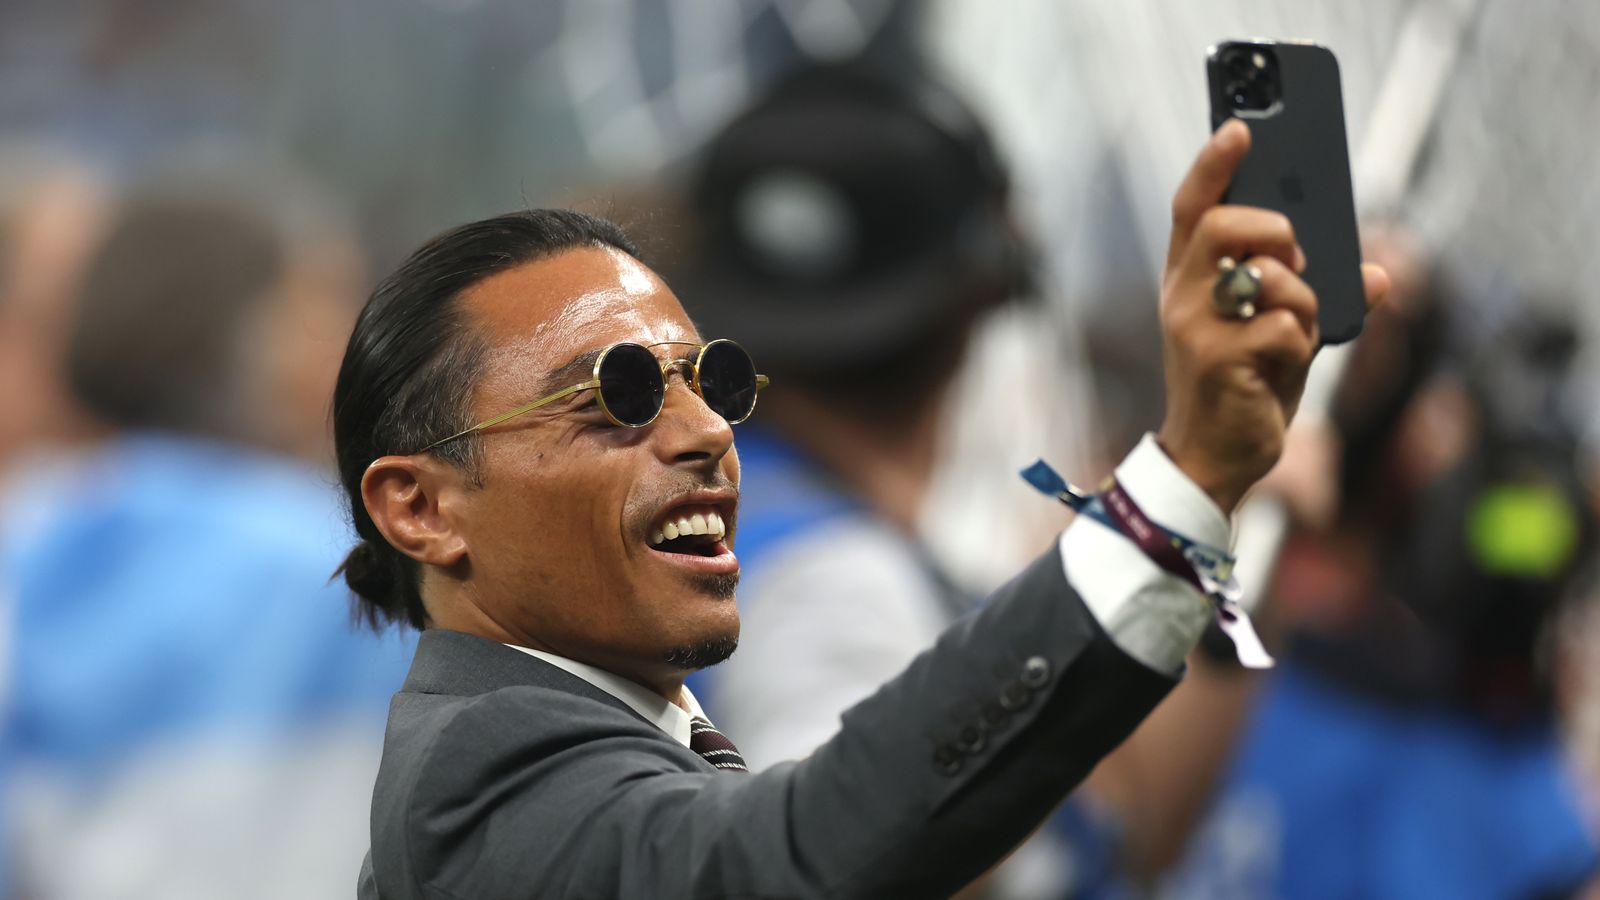 Salt Bae's World Cup final antics on pitch being investigated by FIFA